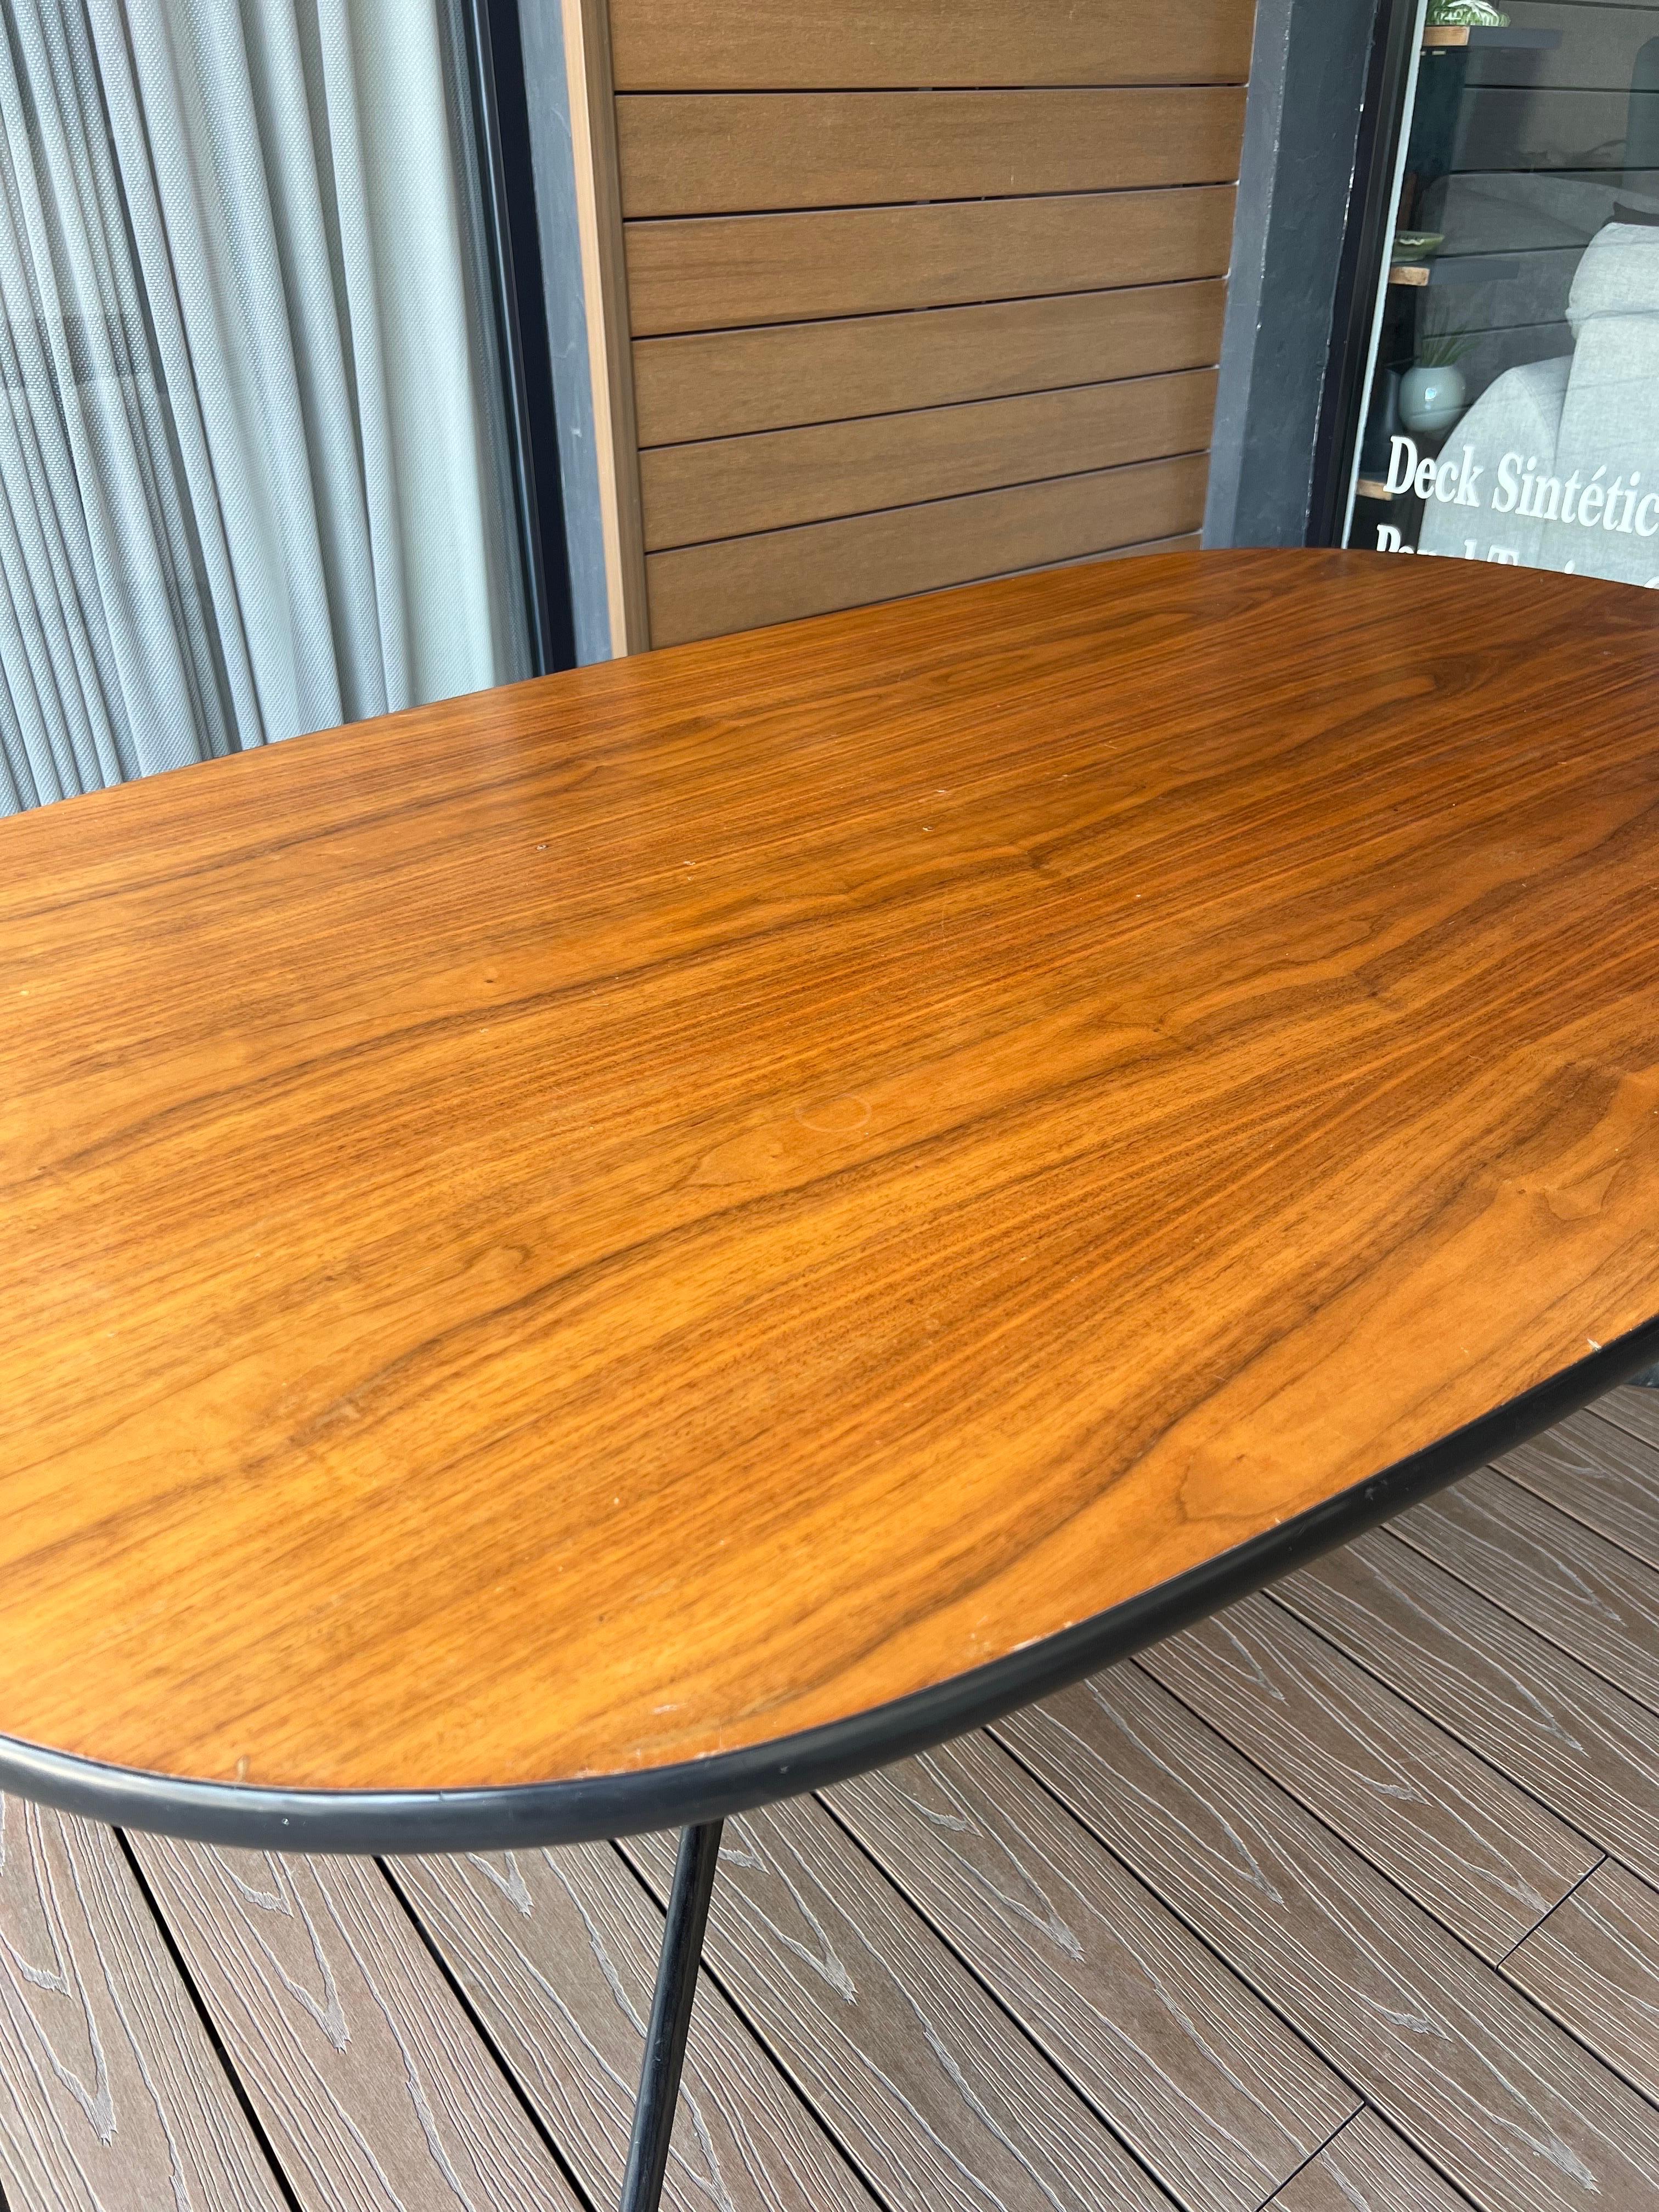 Charles & Ray Eames for Herman Miller Conference Dining Table In Fair Condition For Sale In San Pedro Garza Garcia, Nuevo Leon